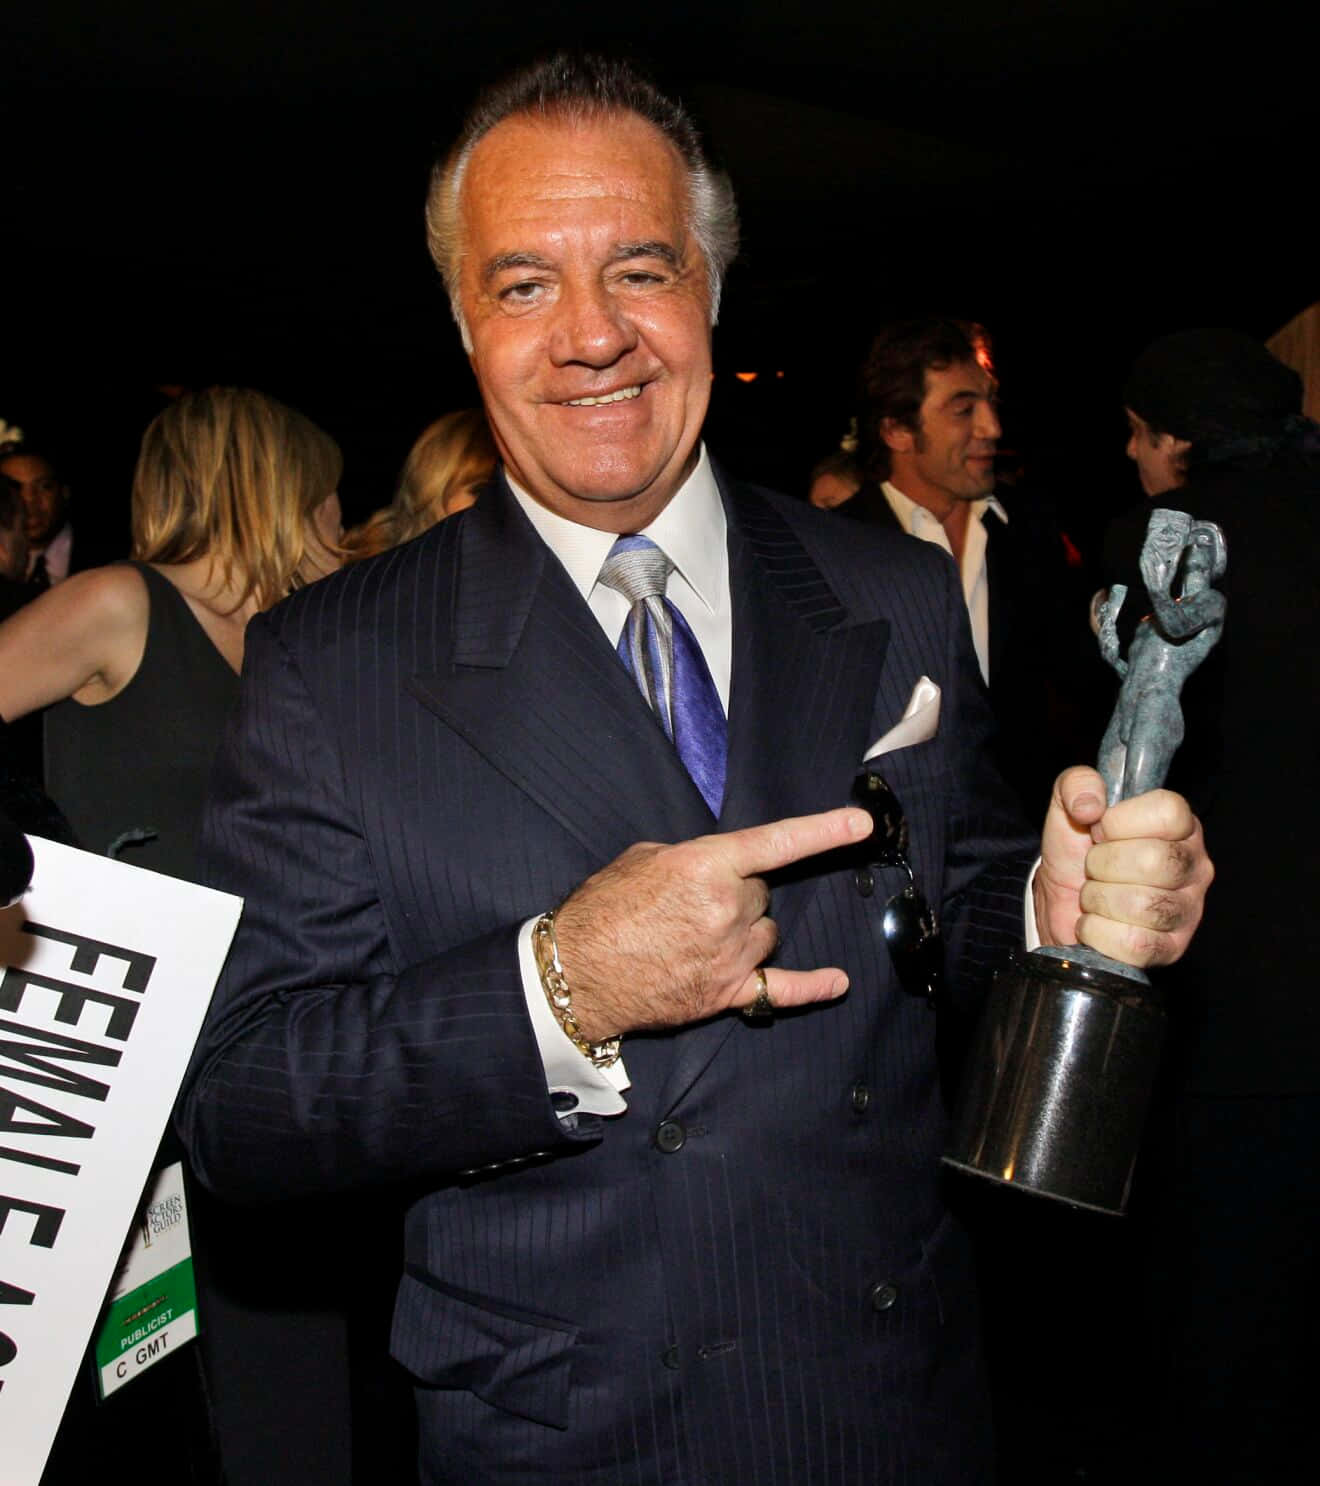 Tony Sirico striking a pose in a suit Wallpaper